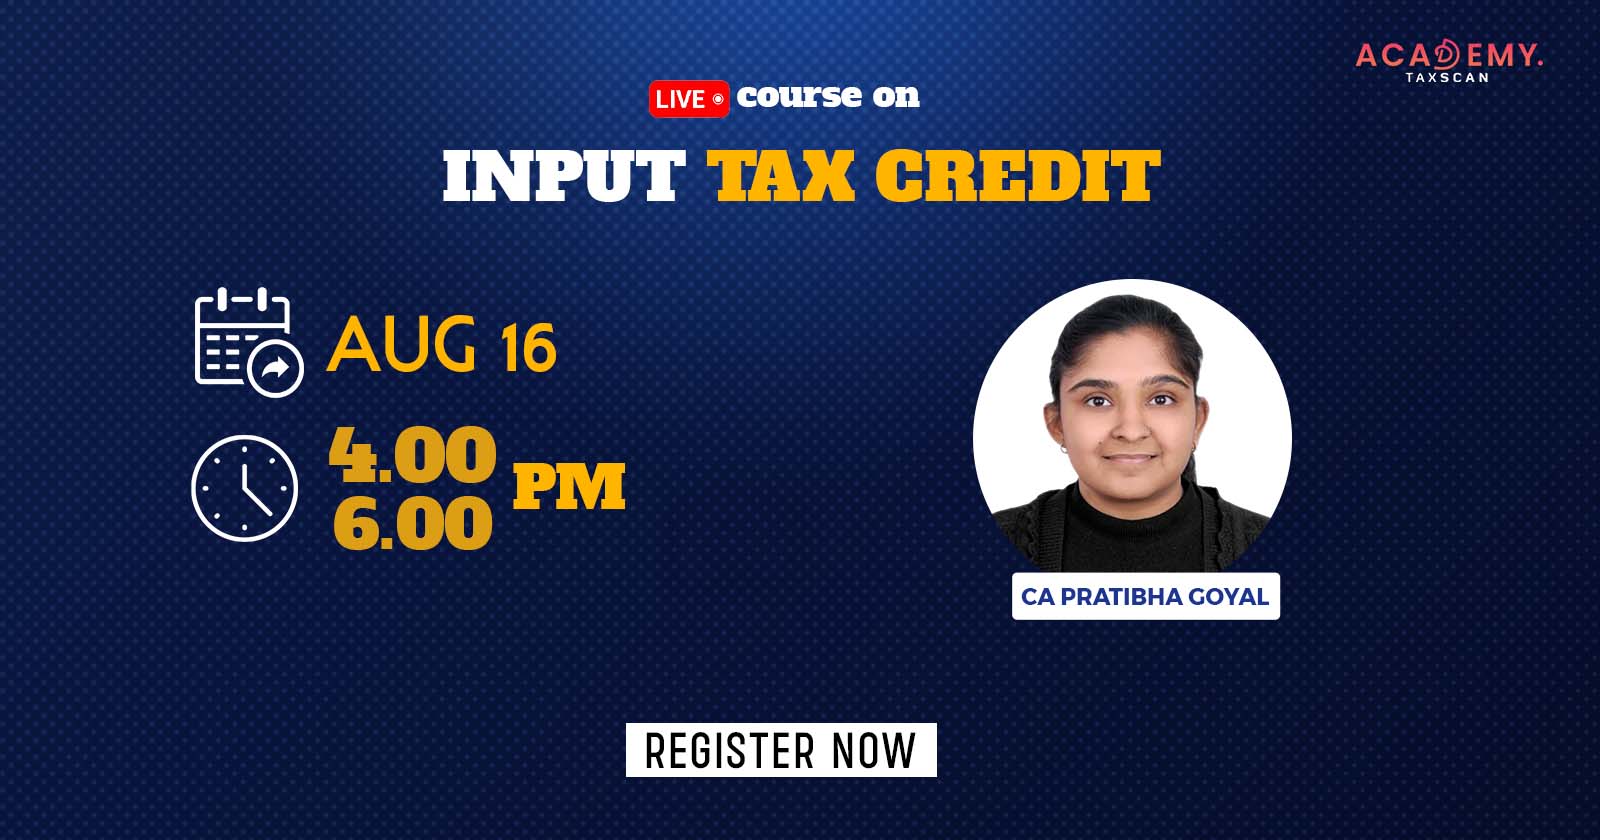 Live Course -Input Tax Credit - ITC Course - ITC Live Course - Online Certificate Course - Online Certificate Course2023 - Certificate Course - Taxscan Academy